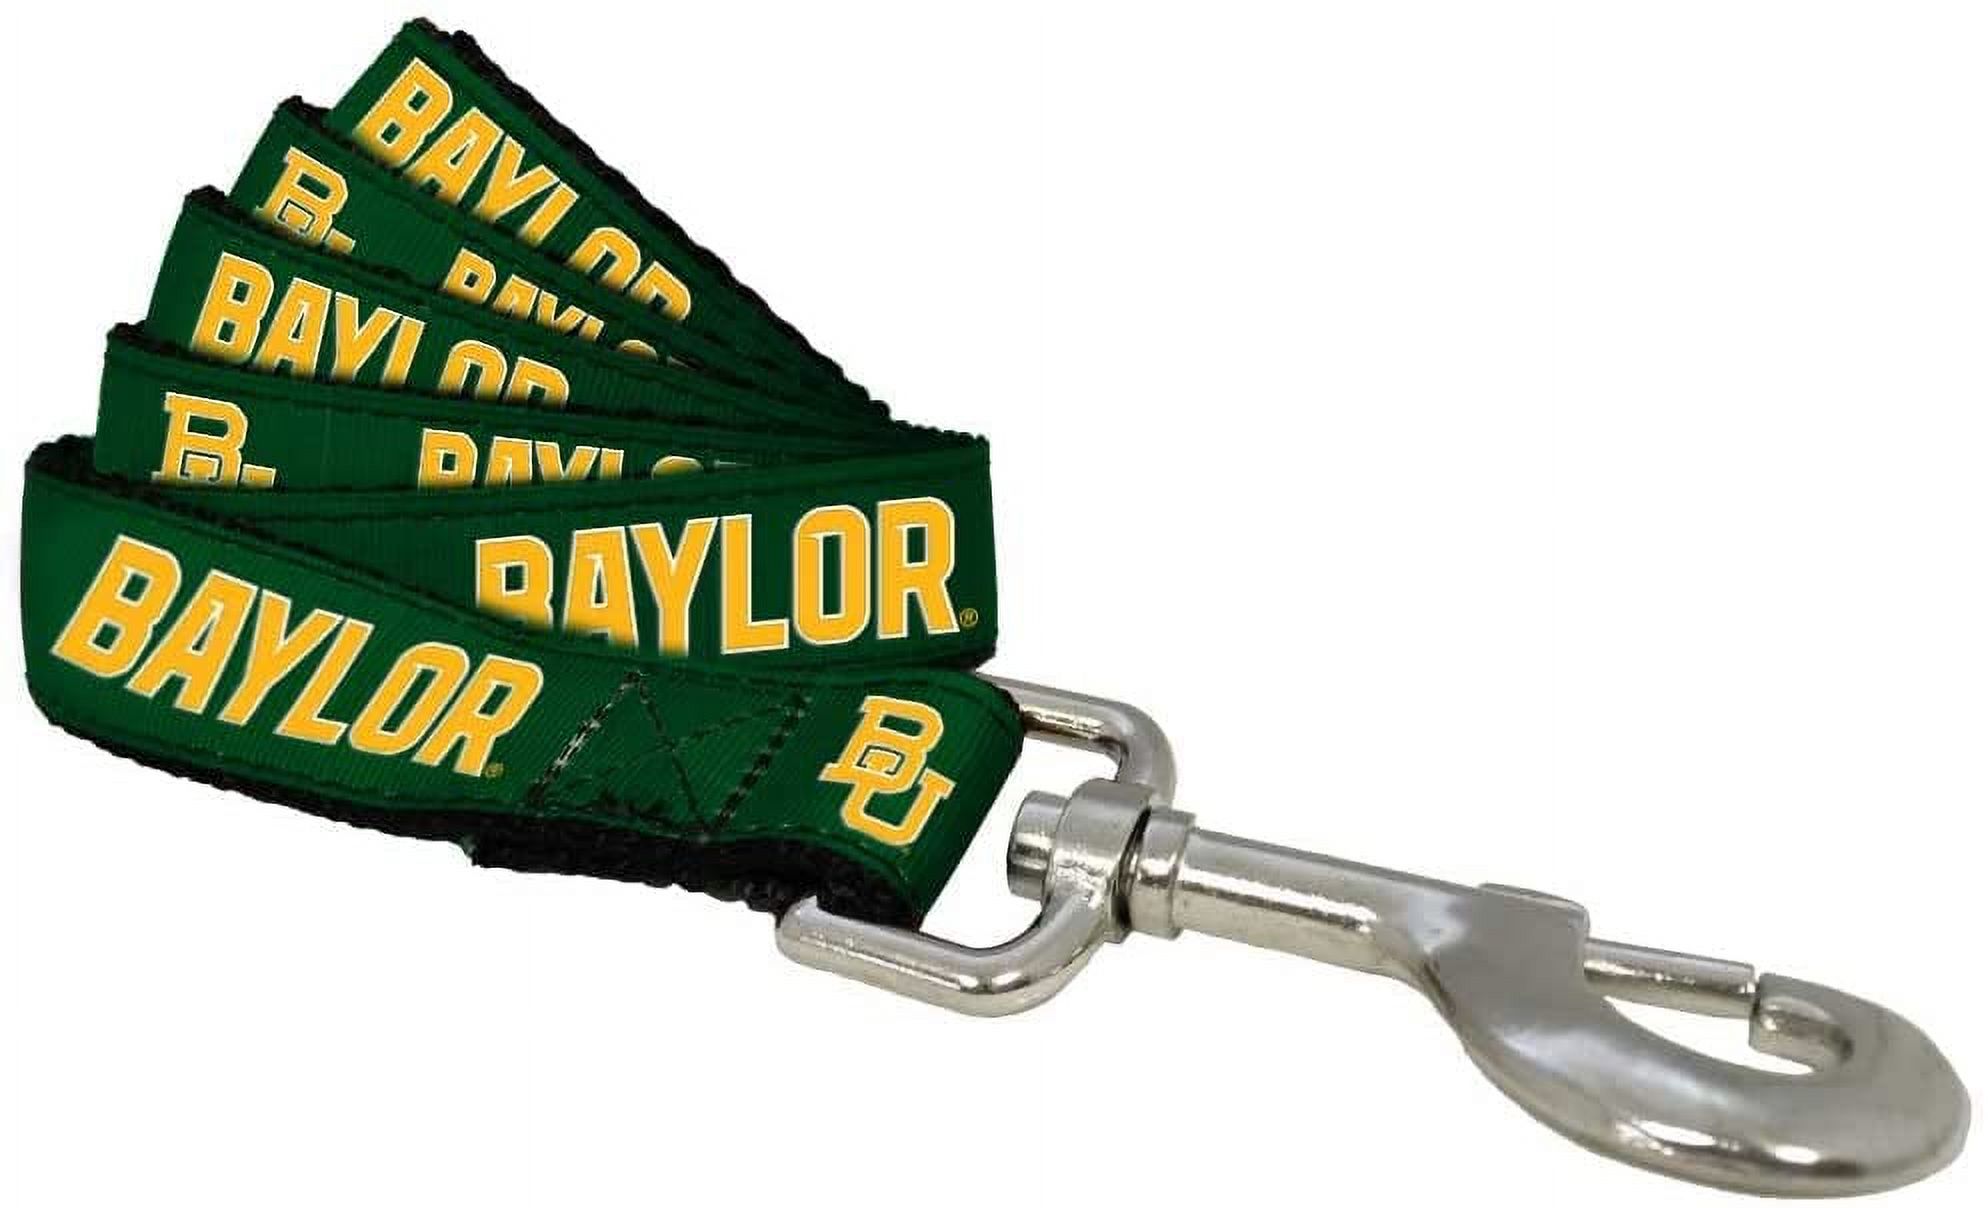 Brand New Baylor Small Pet Dog Collar(1 Inch Wide, 8-14 Inch Long), and Small Leash(5/8 Inch Wide, 6 Feet Long) Bundle, Official Bears Logo/Colors - image 3 of 3